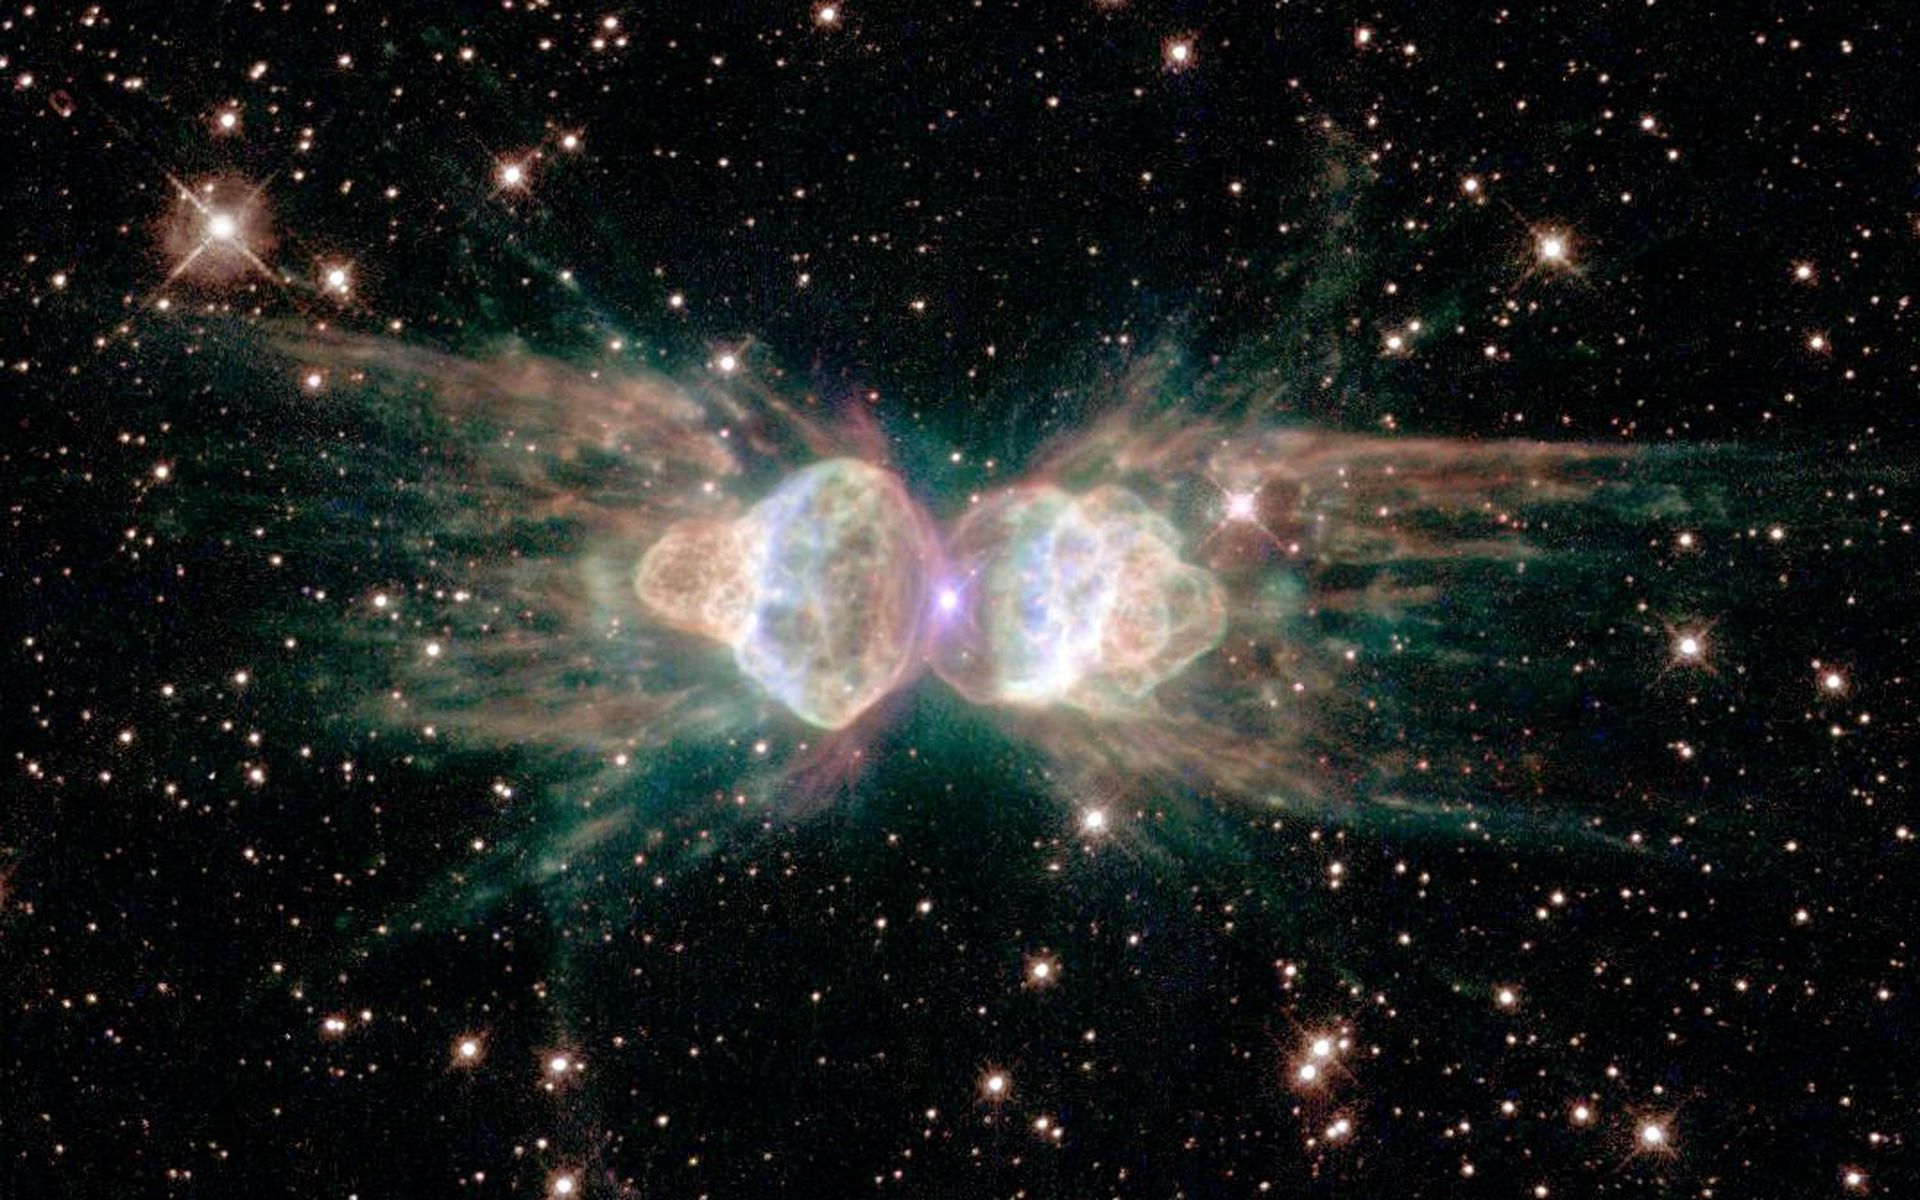 This Hubble image of the planetary nebula Mz3 looks like a pair of angels to me; more mundanely it's called the Ant Nebula...